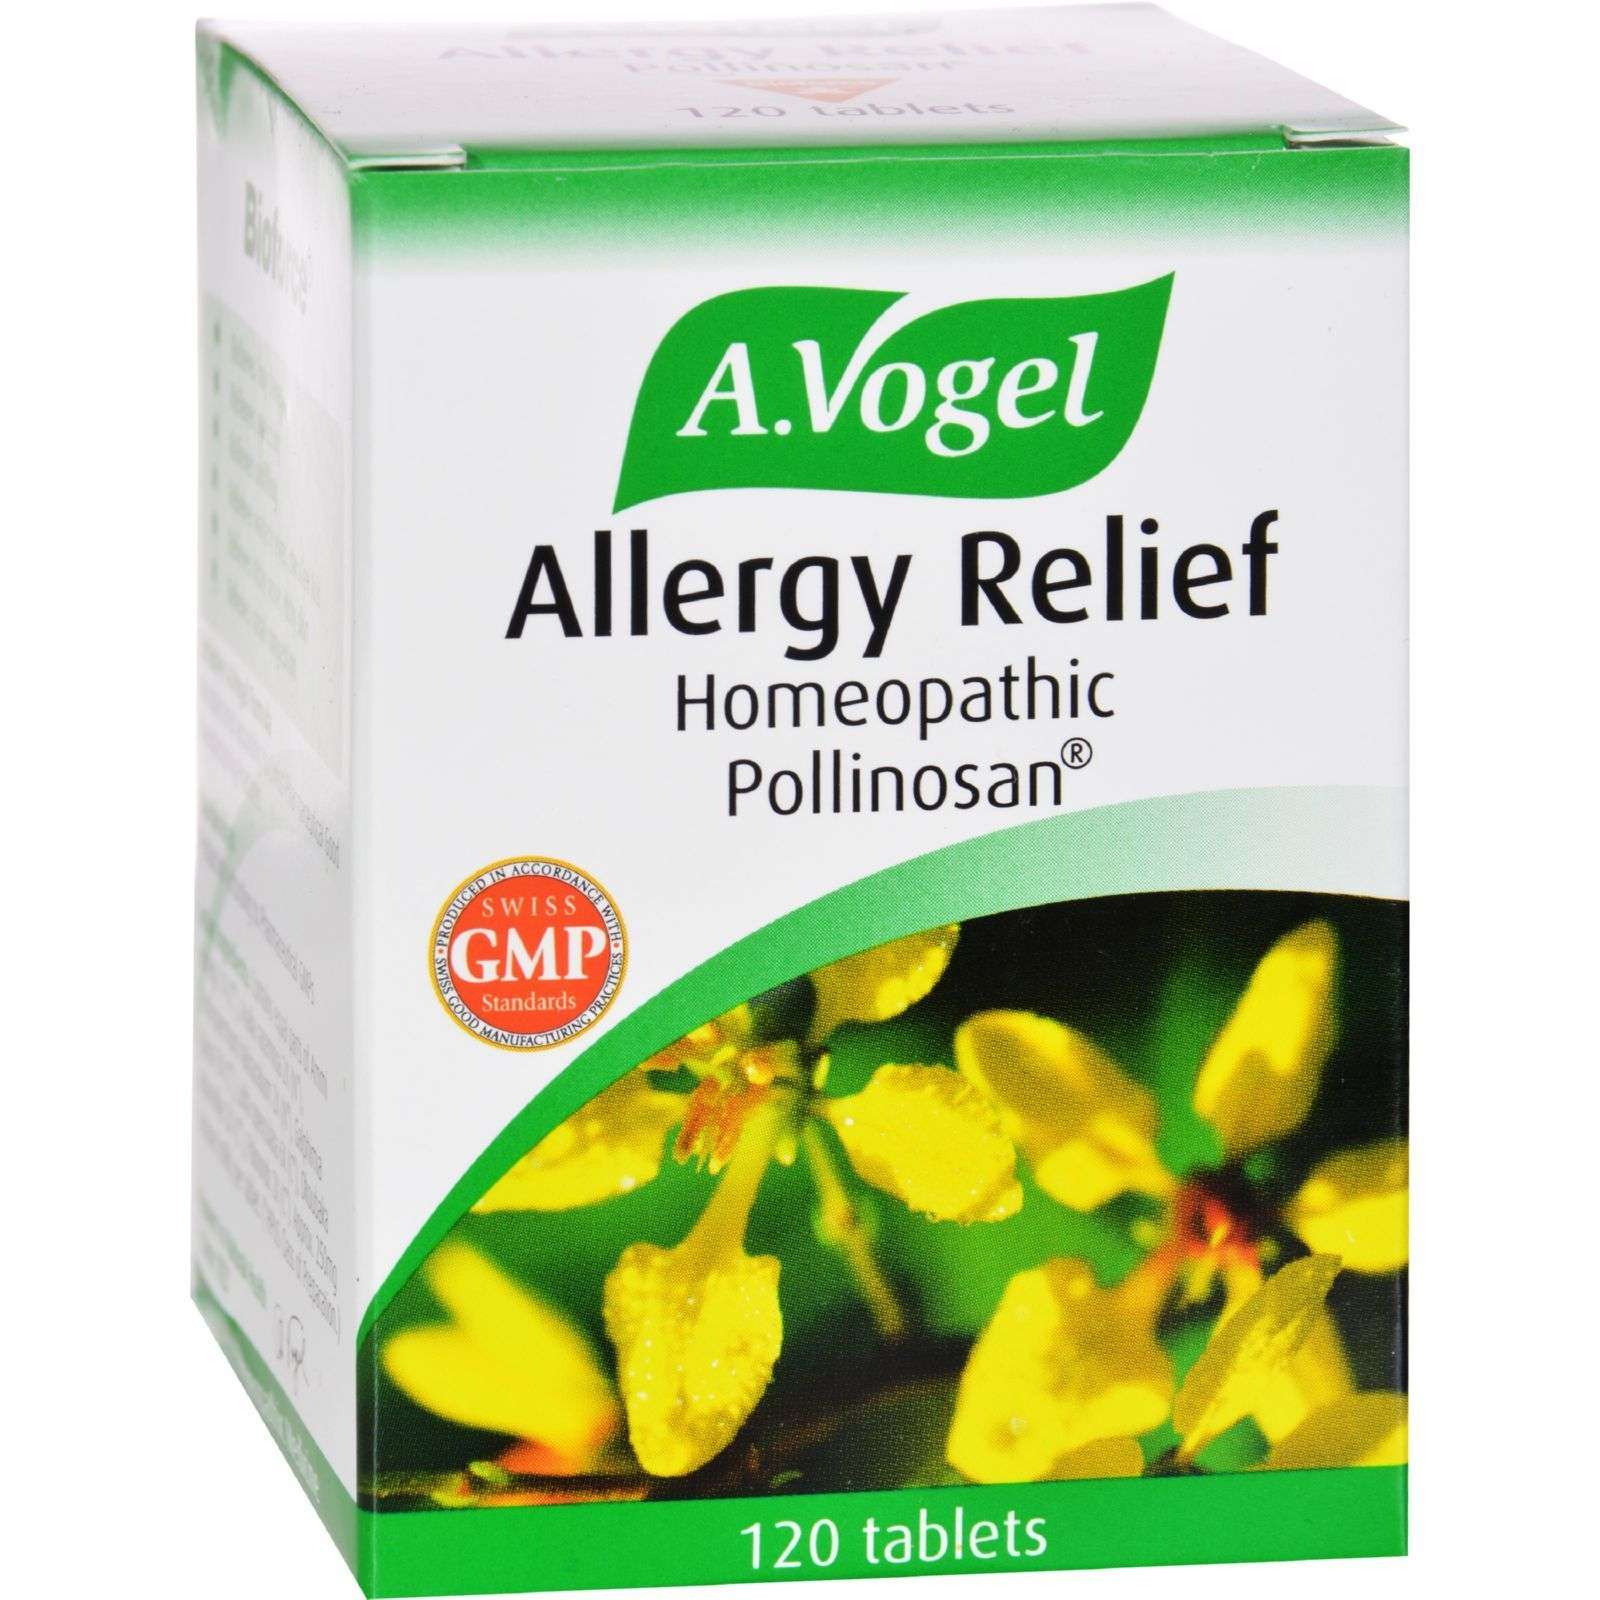 A Vogel Allergy Relief